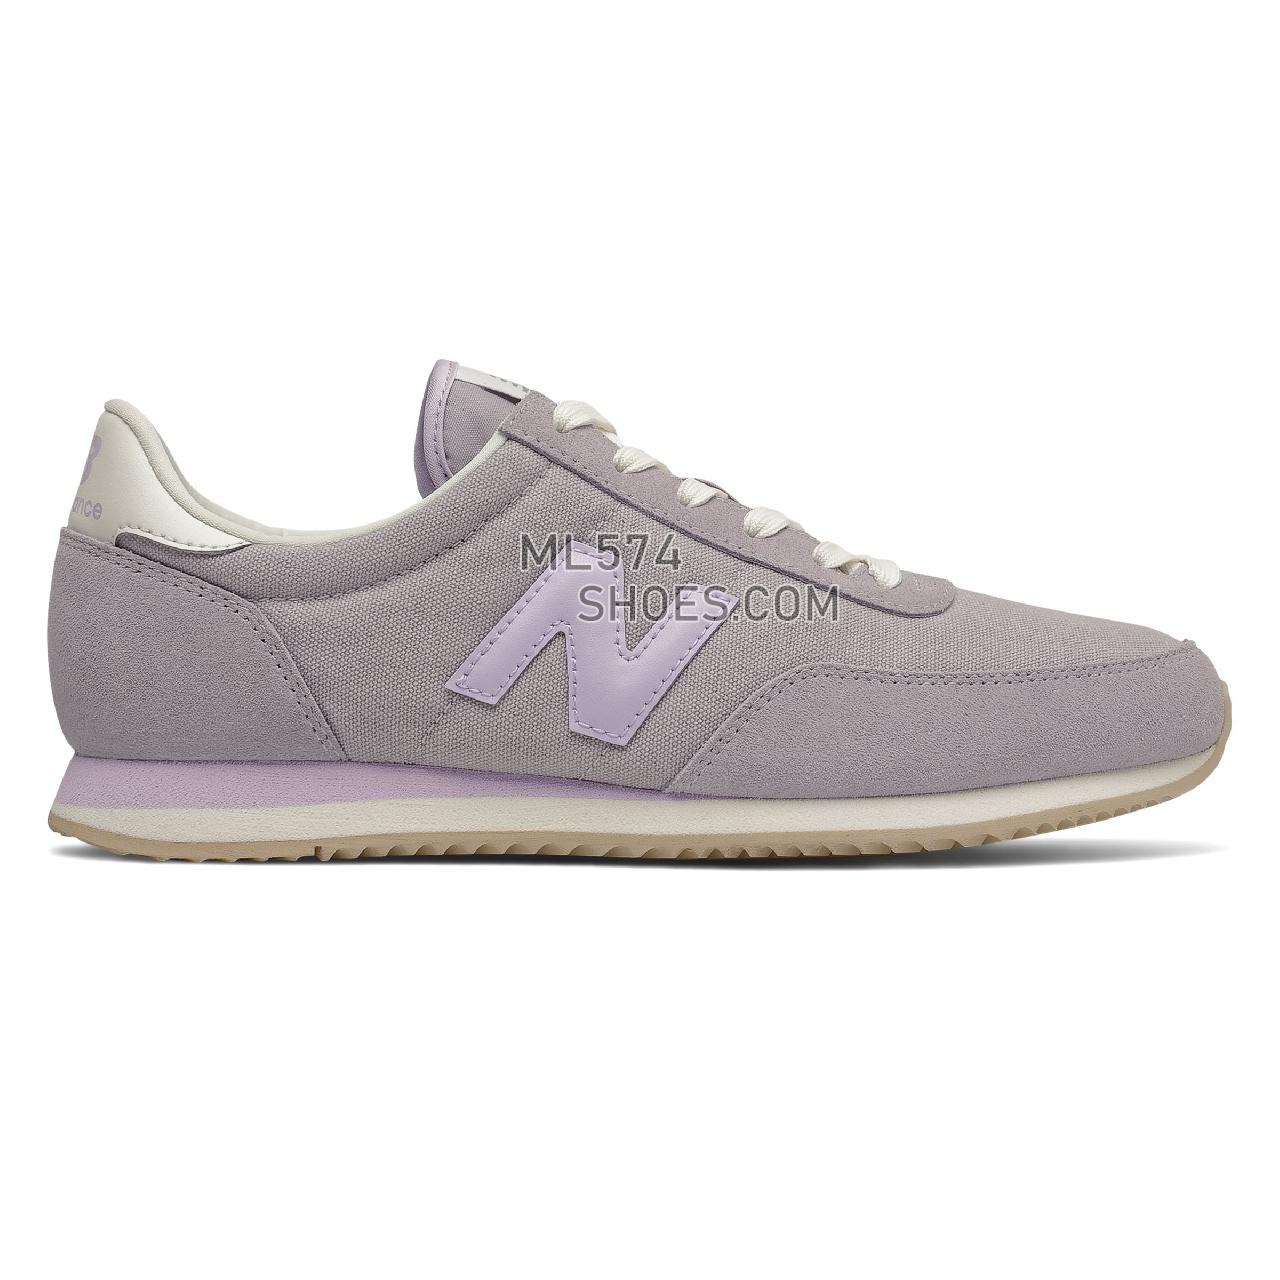 New Balance 720 - Women's Classic Sneakers - Whisper Grey with Silent Grey - WL720CP1